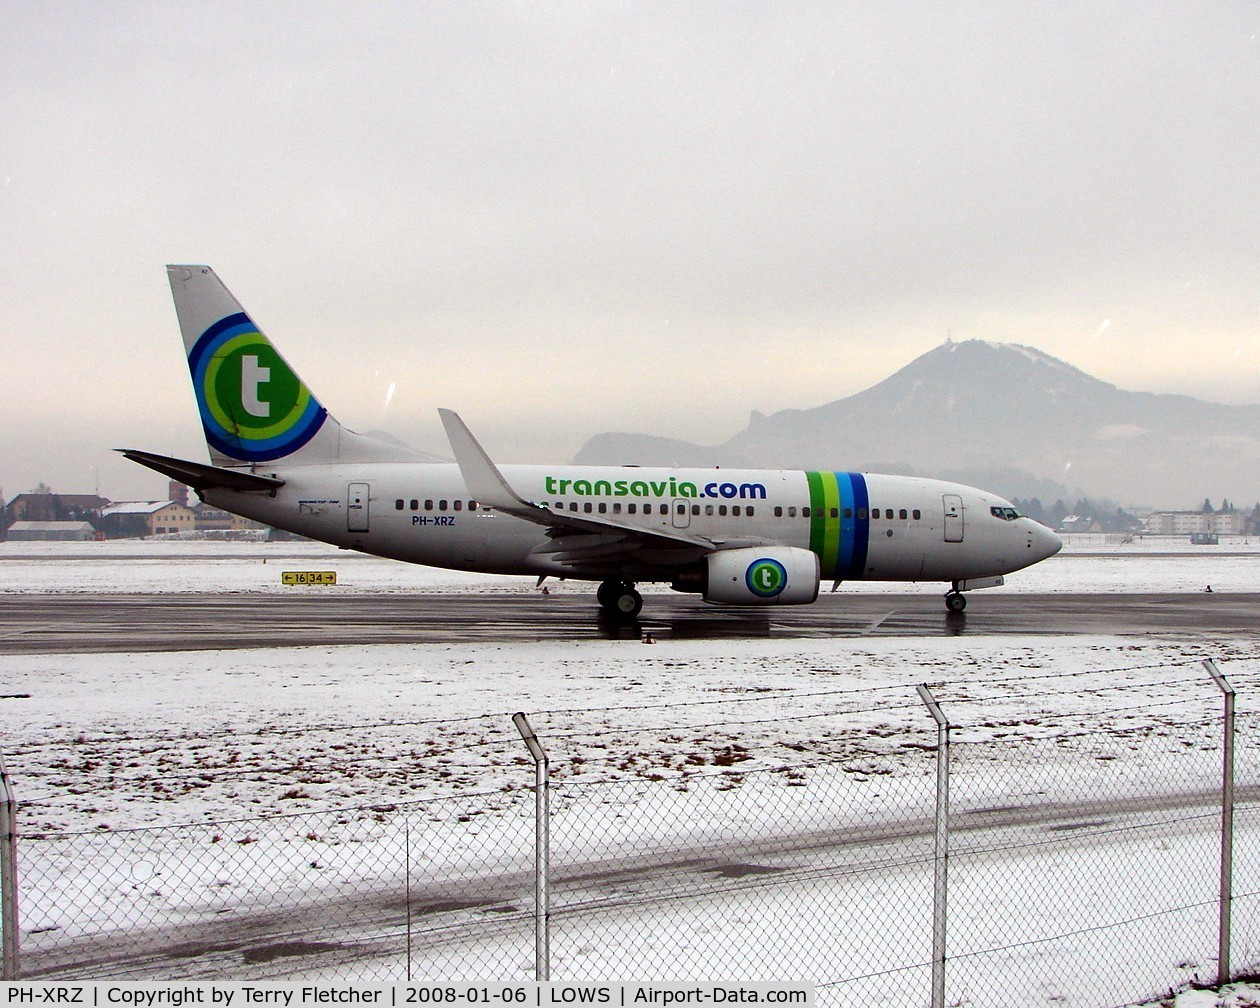 PH-XRZ, 2003 Boeing 737-7K2 C/N 33462, Transavia B737-700 taxies to the hold at Salzburg on a very icy morning